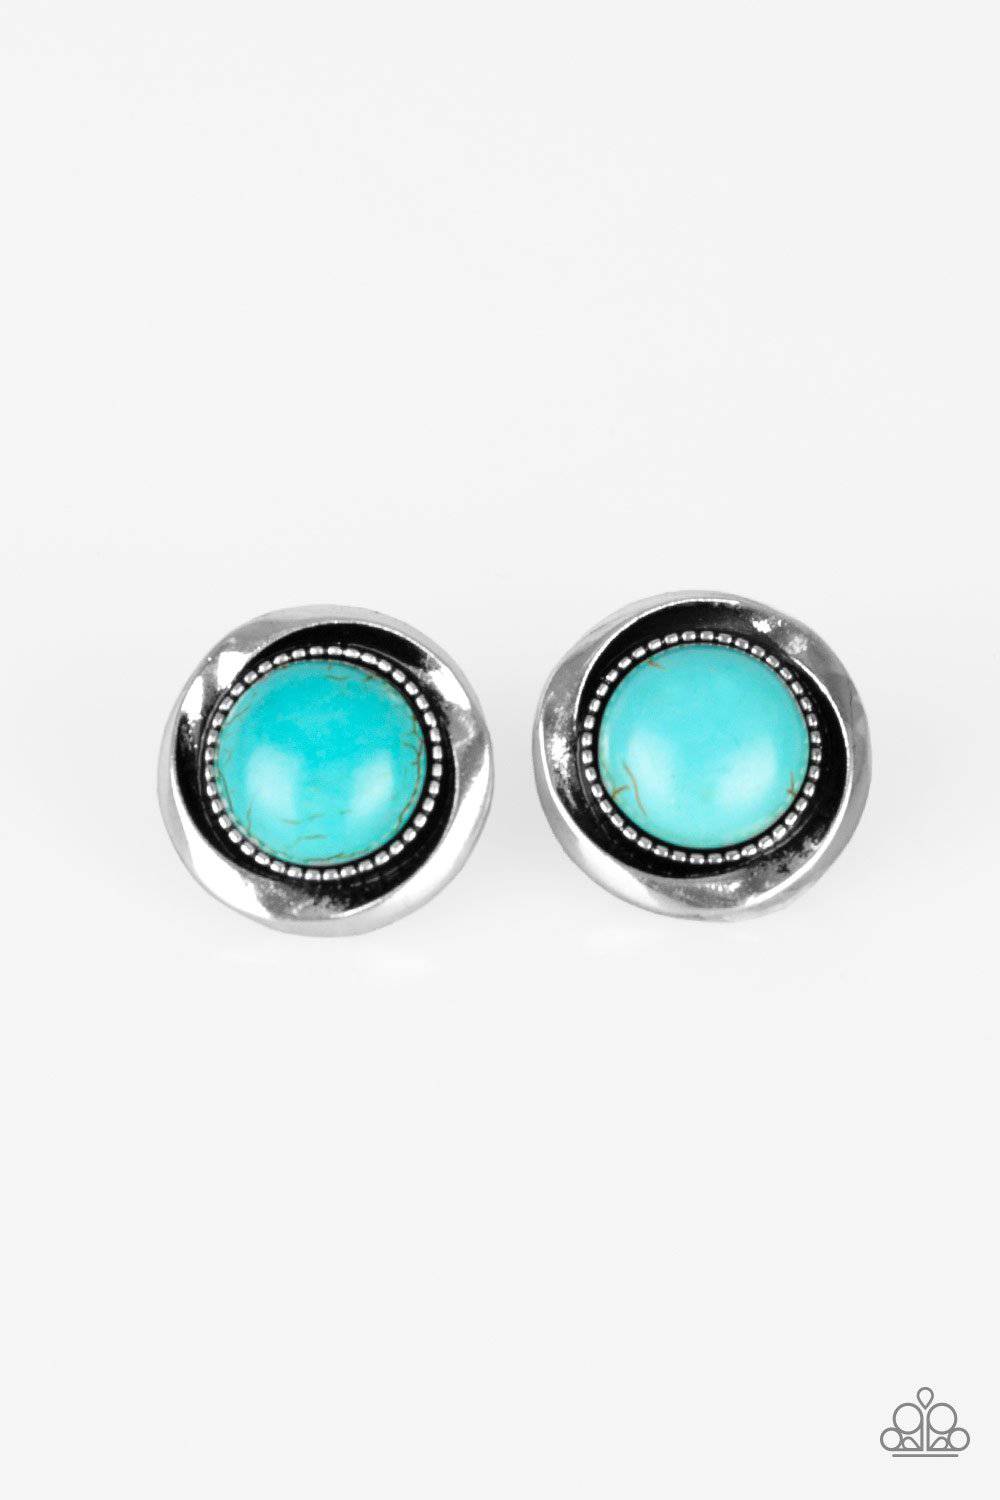 D66 - Out Of This Galaxy Blue Earrings by Paparazzi Accessories on Fancy5Fashion.com